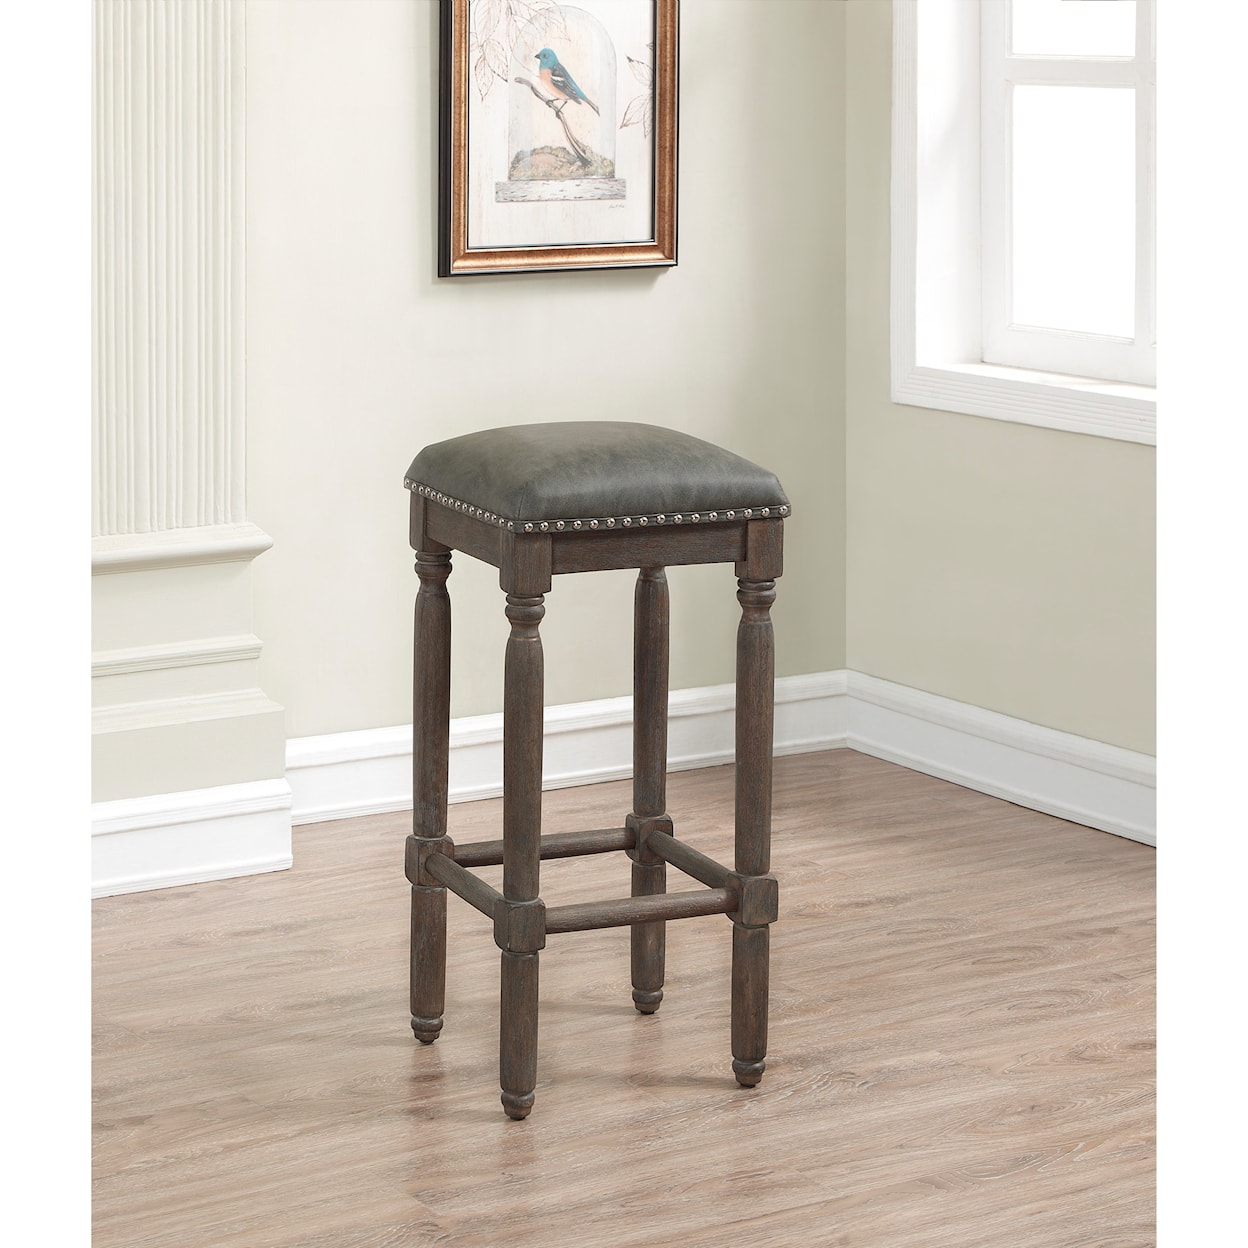 American Woodcrafters Wood Frame Barstools Backless Stool Wood Frame